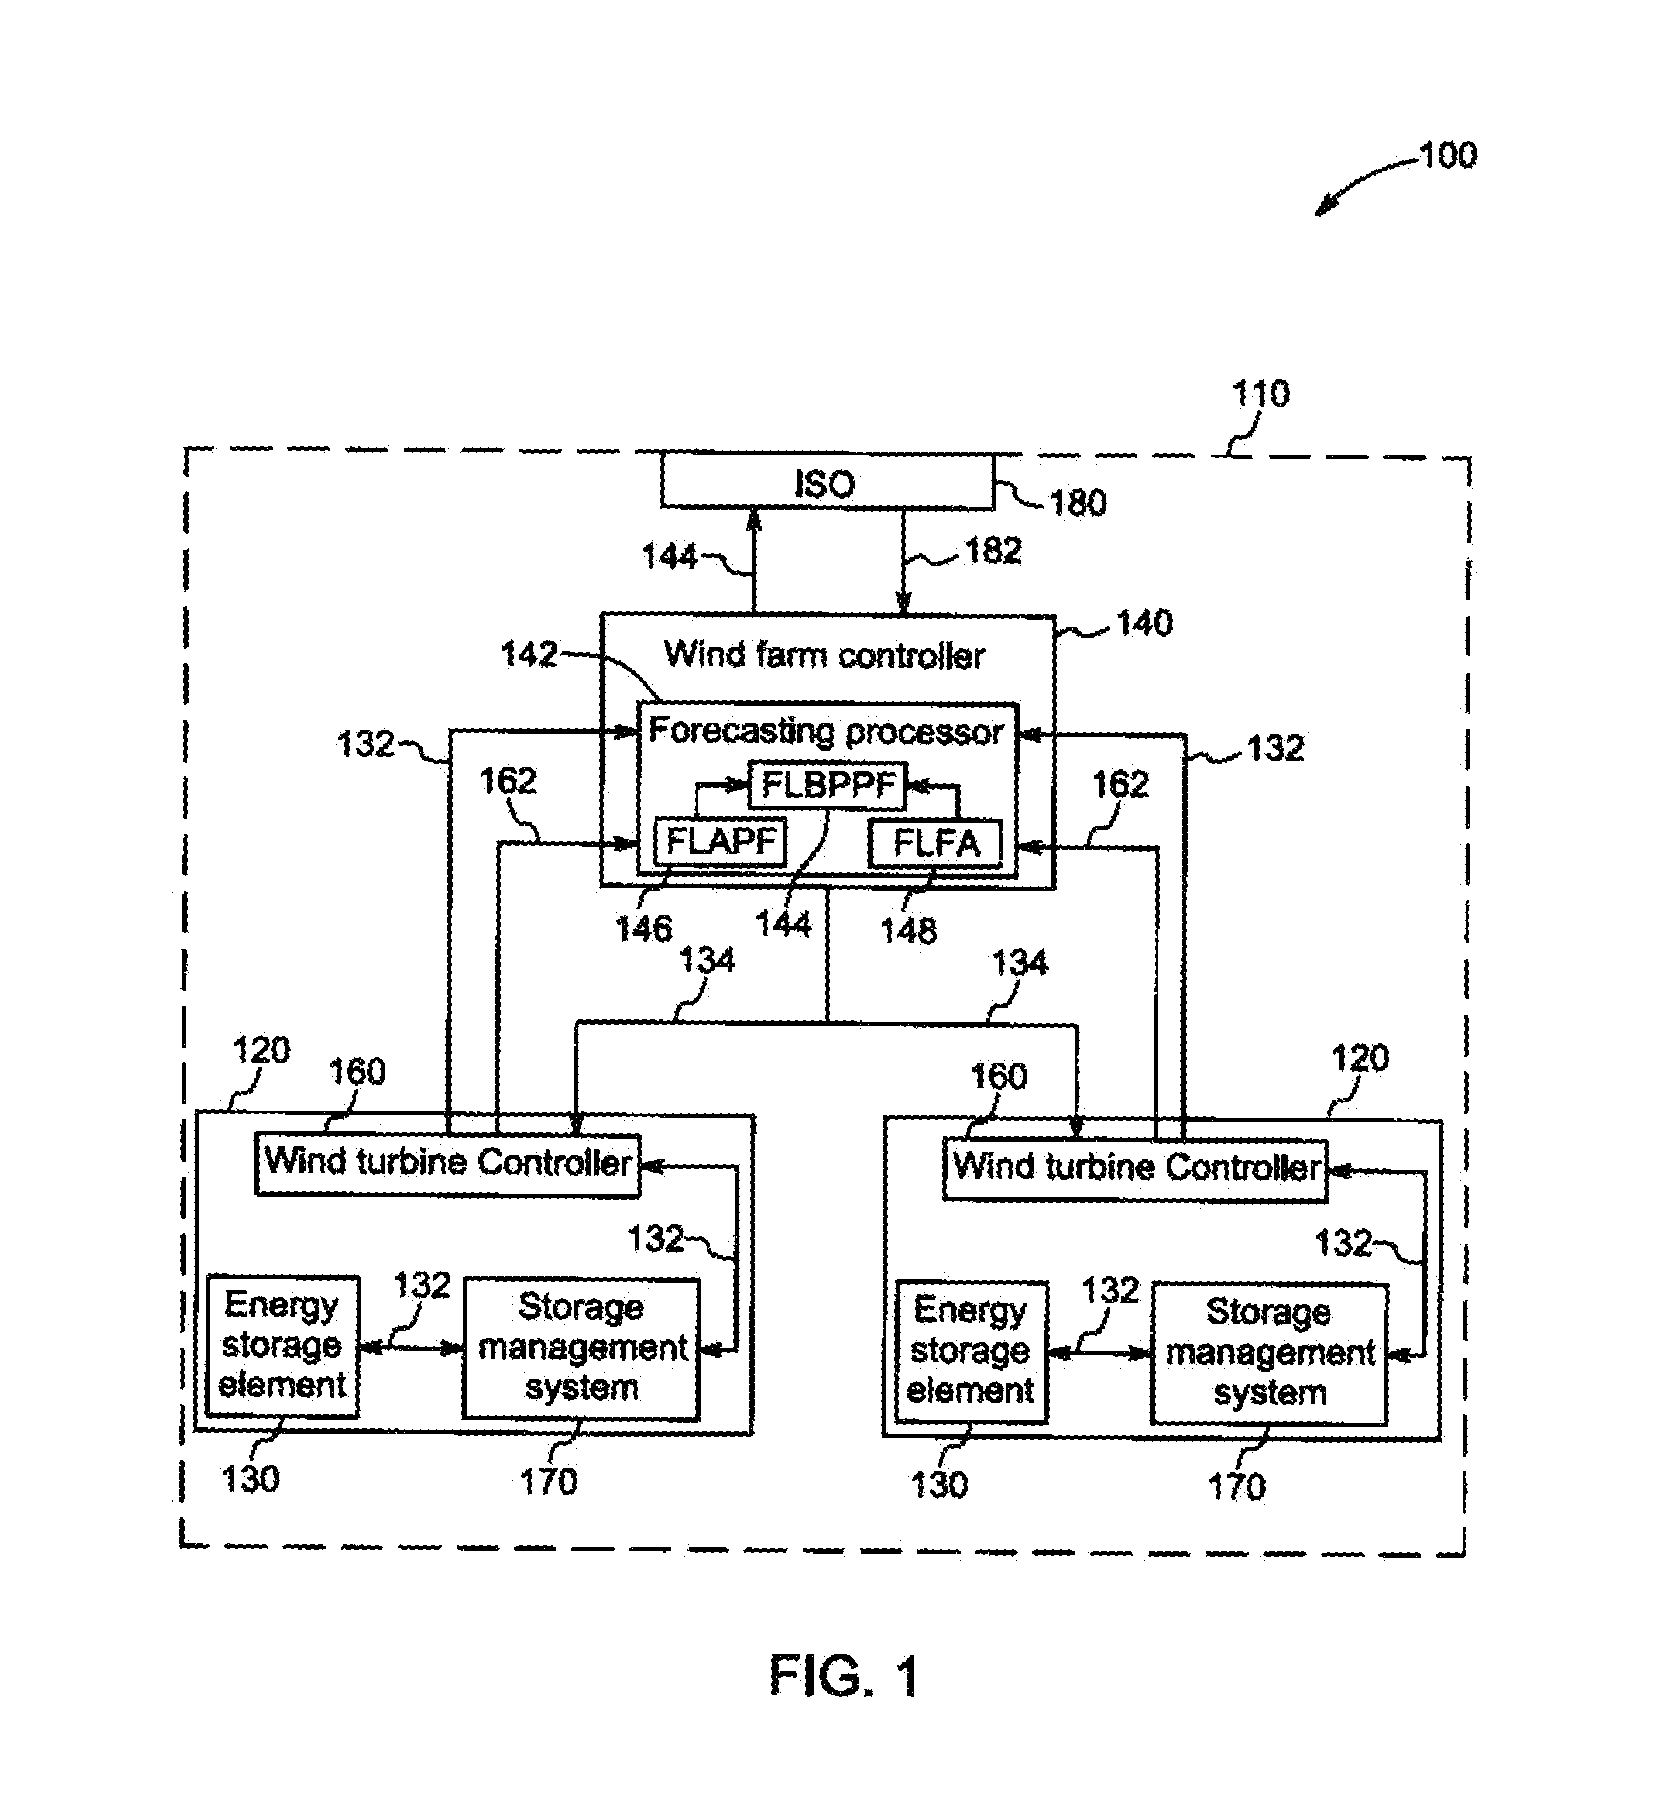 System and method for automatic generation control in wind farms